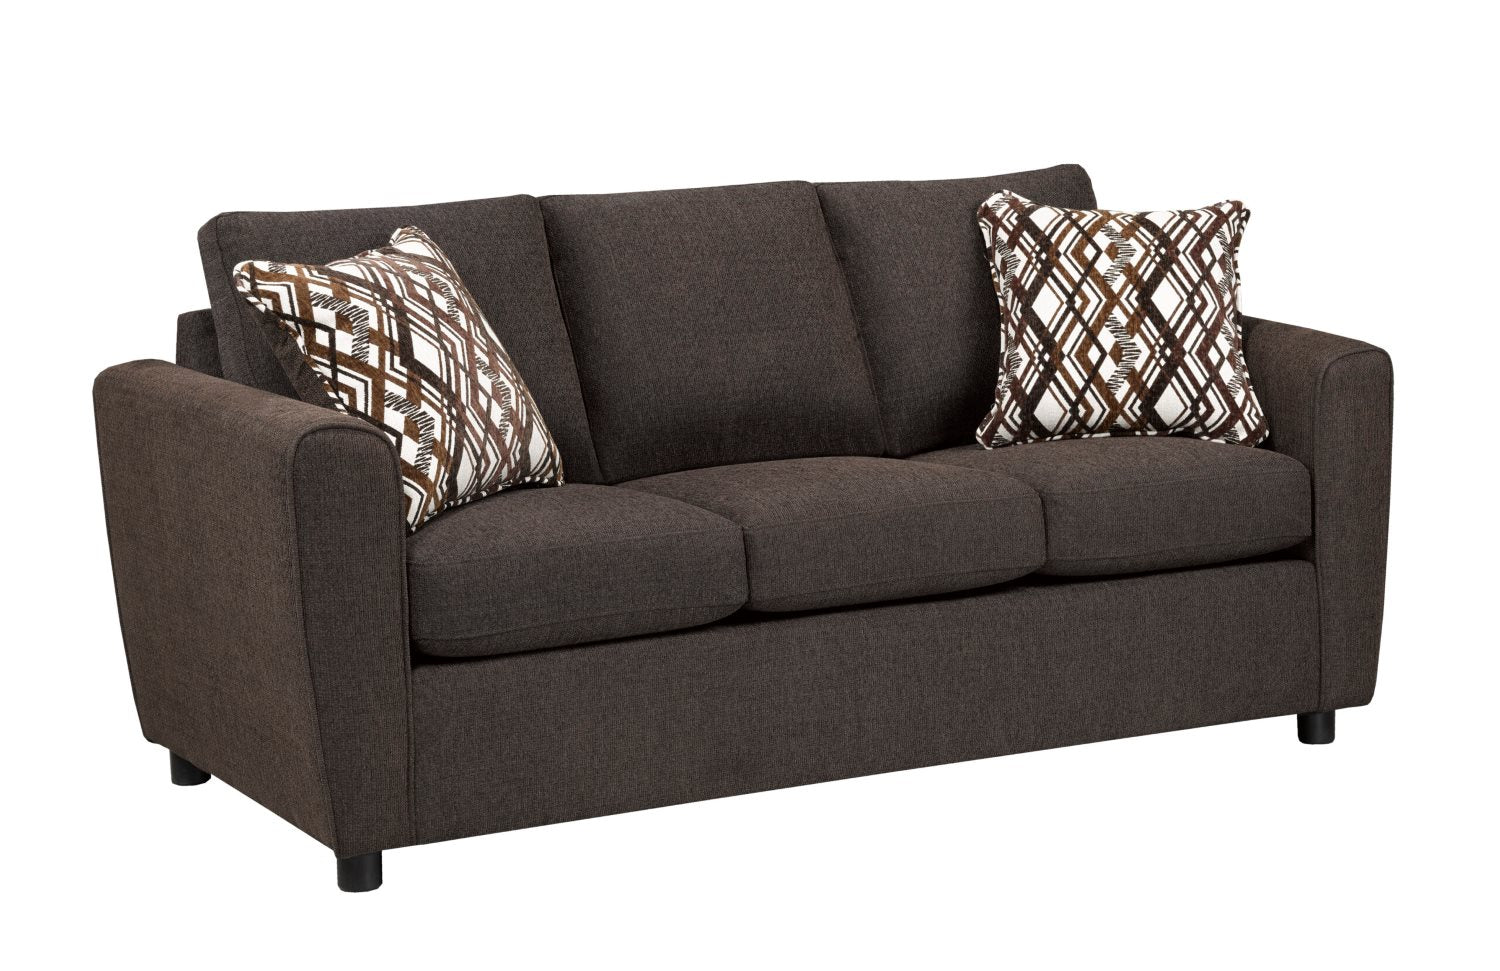 Canadian Made Huttwill Chocolate Sofa Collection 1636